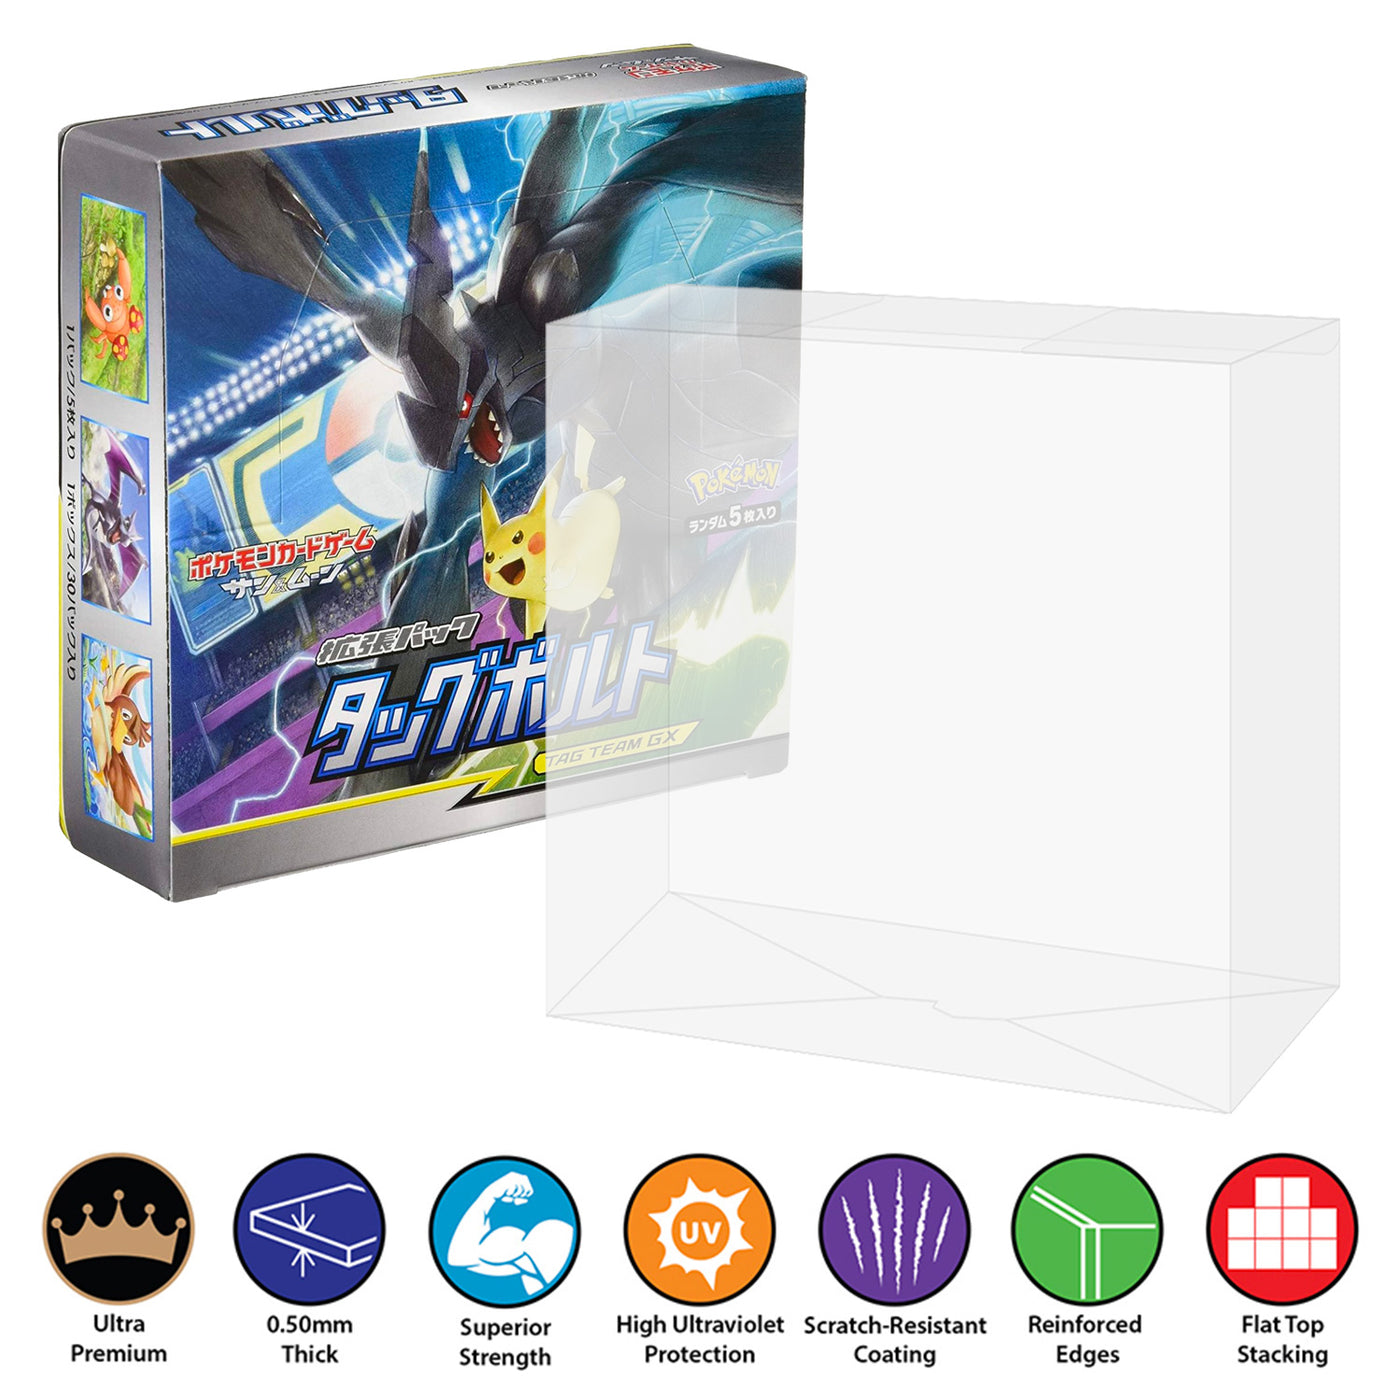 POKEMON TCG Japanese Expansion Set Box Protectors (50mm thick, UV & Scratch Resistant) 5.5h X 5.5w X 1.5d on The Protector Guide App by Display Geek